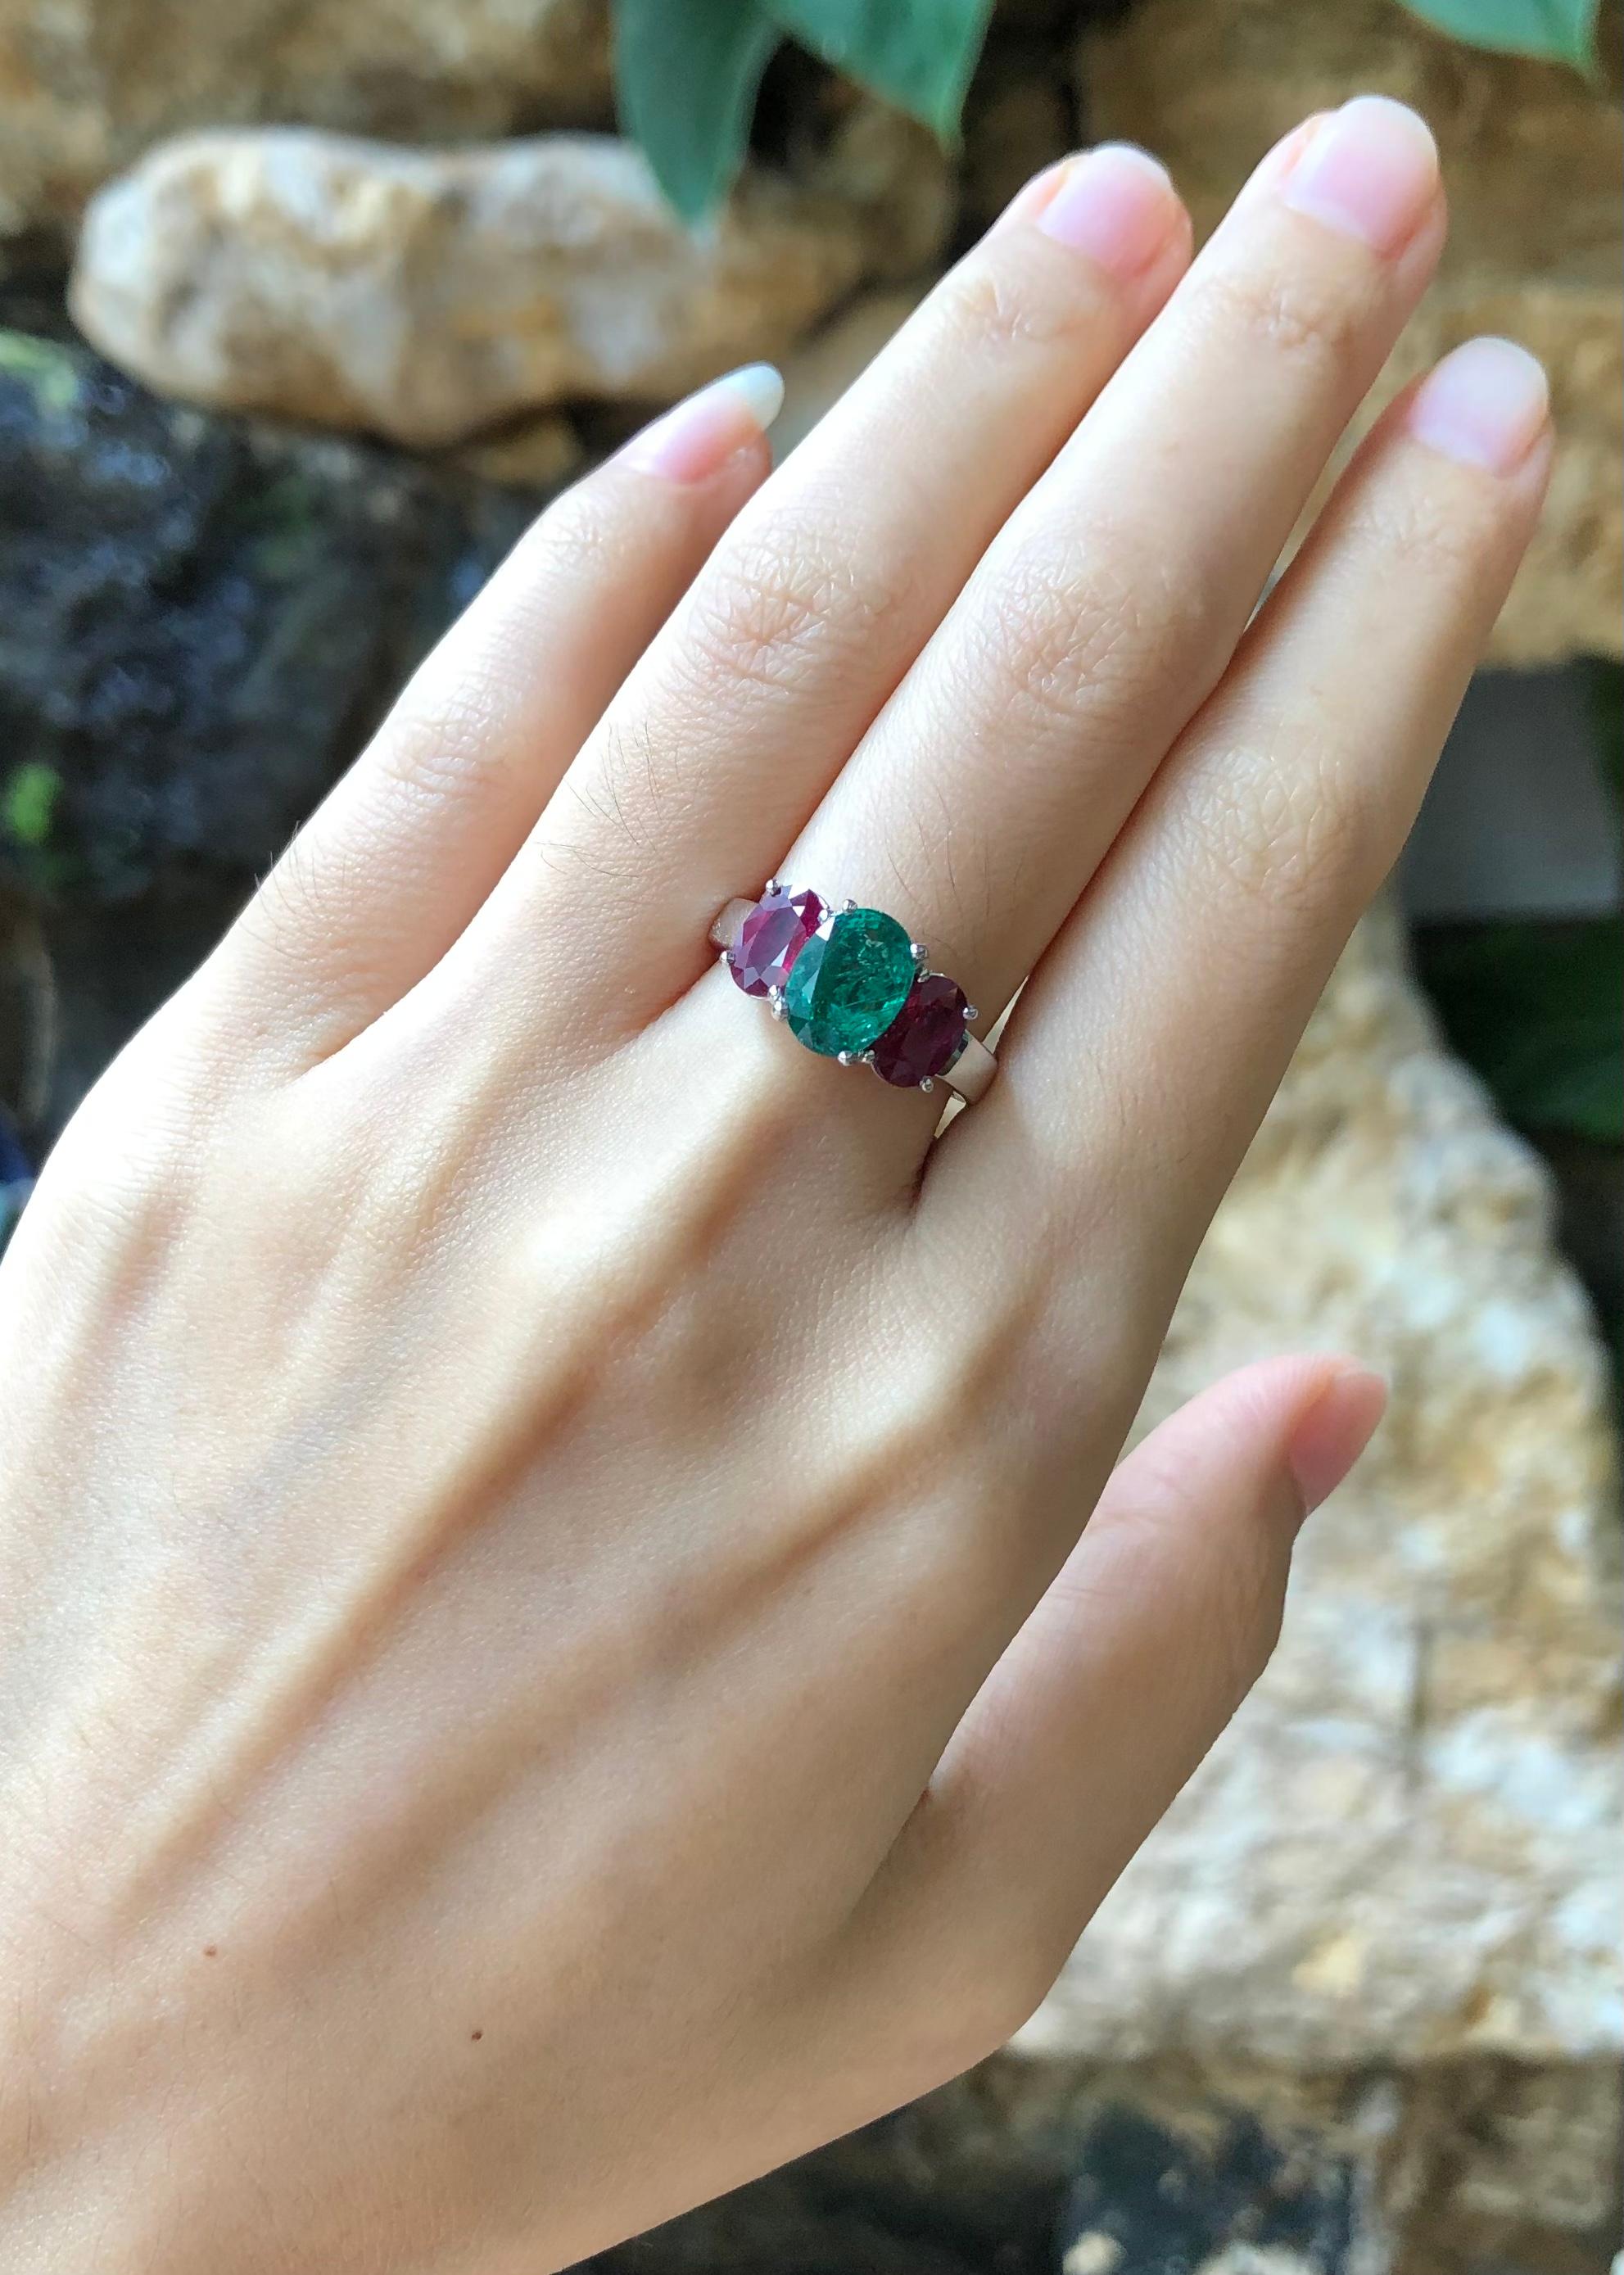 Emerald 1.74 carats with Ruby 2.01 carats Ring set in 18 Karat White Gold Settings

Width:  1.5 cm 
Length: 0.9 cm
Ring Size: 52
Total Weight: 6.52 grams

